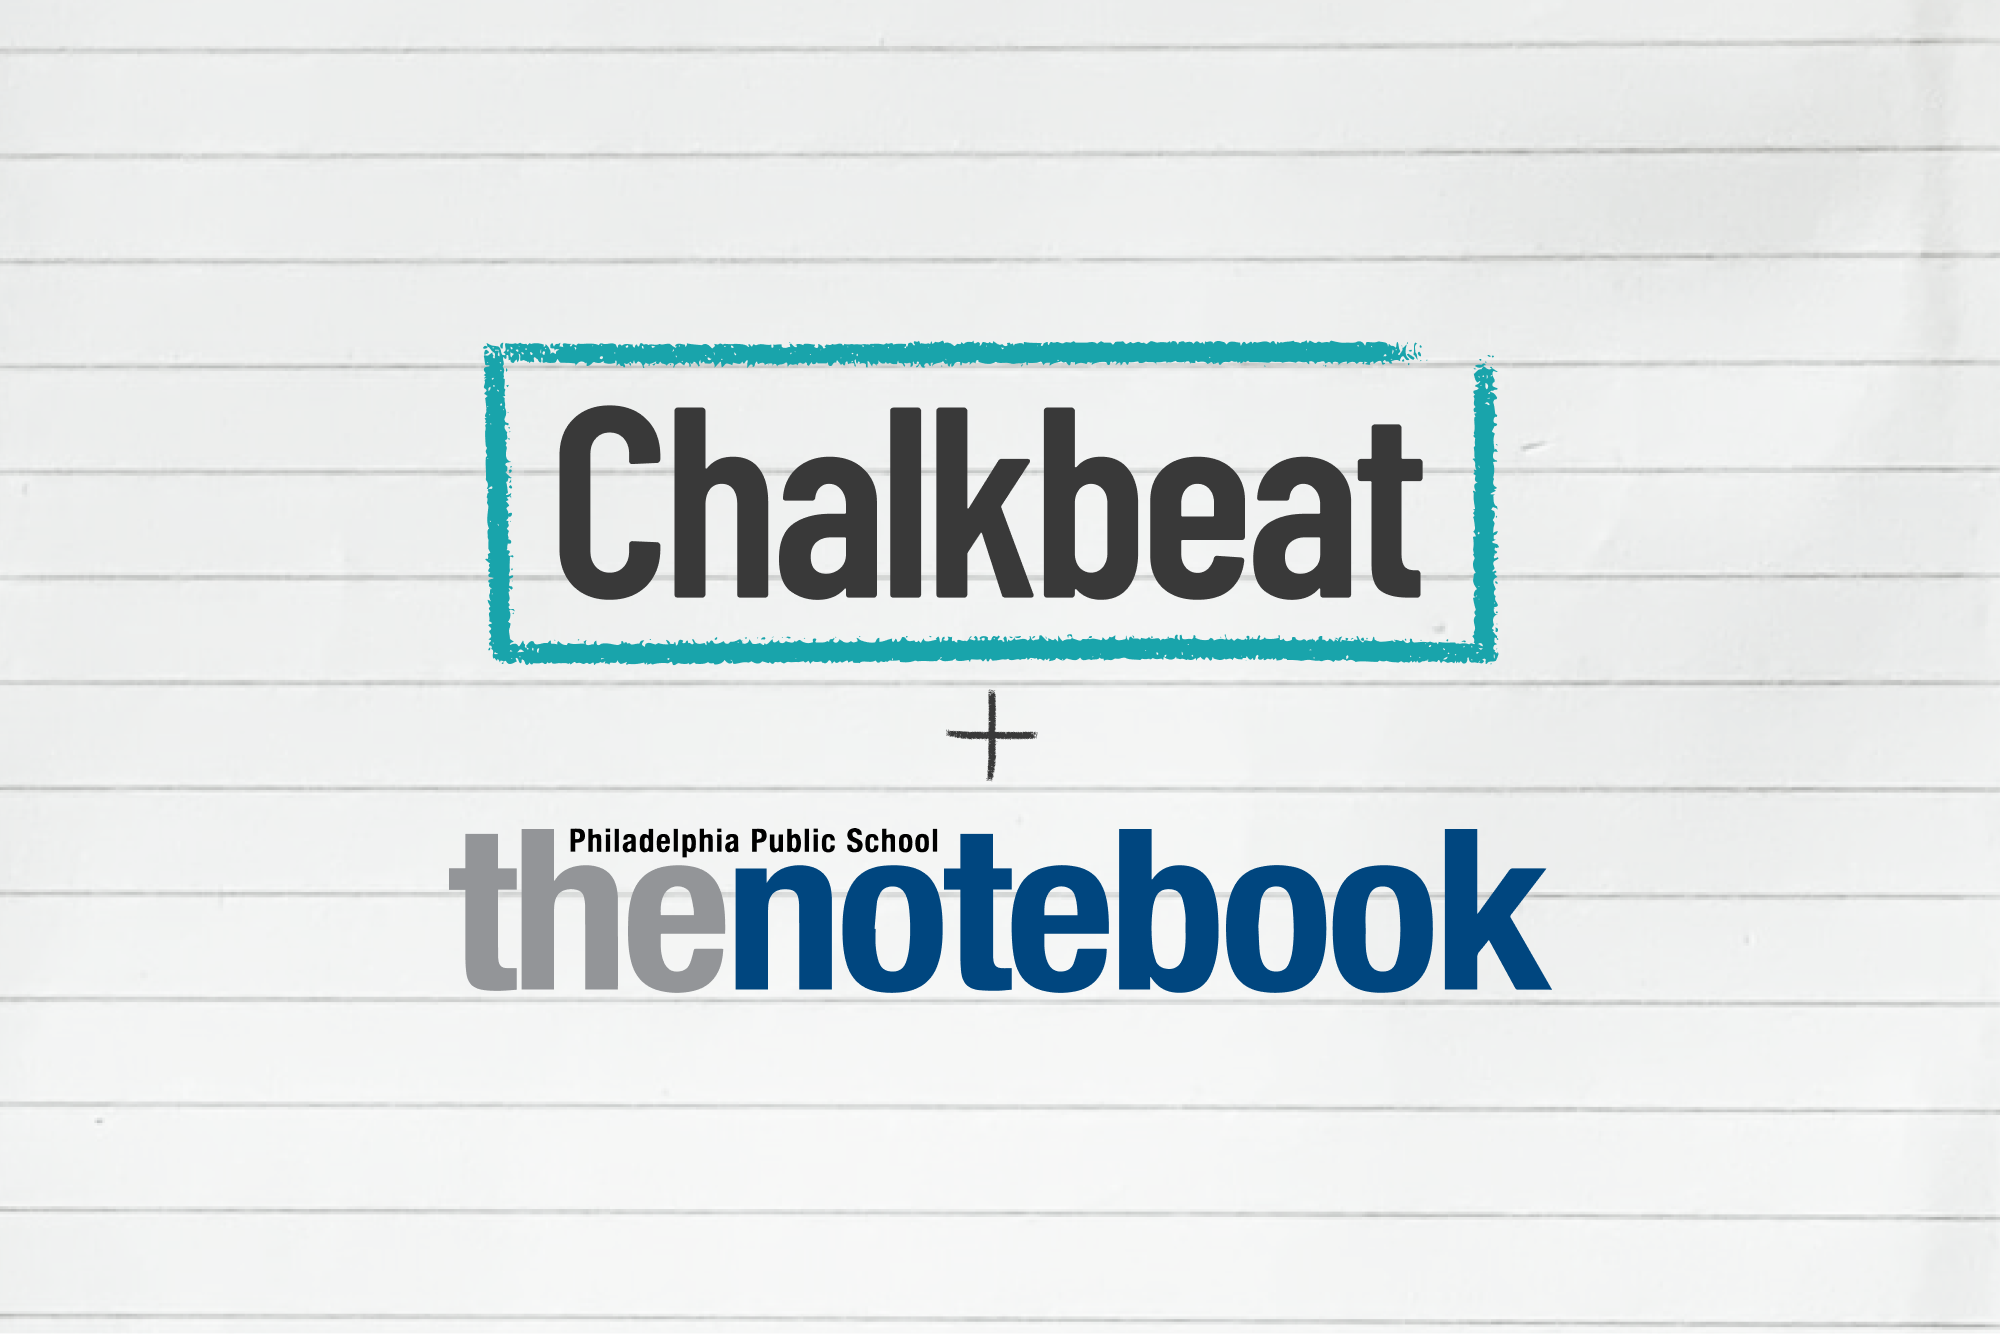 Chalkbeat logo and The Notebook logo